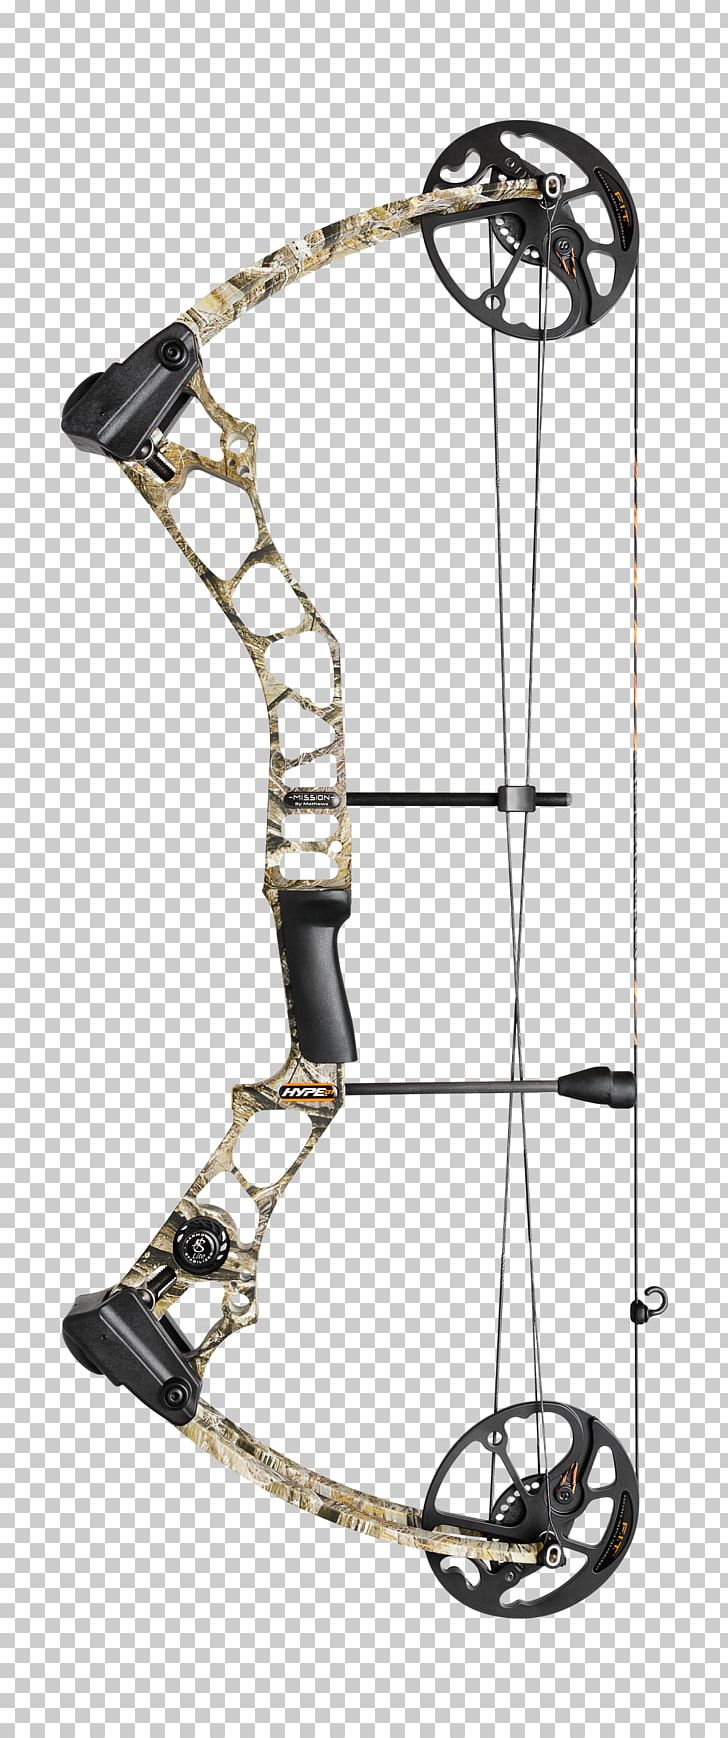 Archery Bow And Arrow Compound Bows Bowhunting PNG, Clipart, Archery, Archery Country, Arrow, Biggame Hunting, Bit Free PNG Download